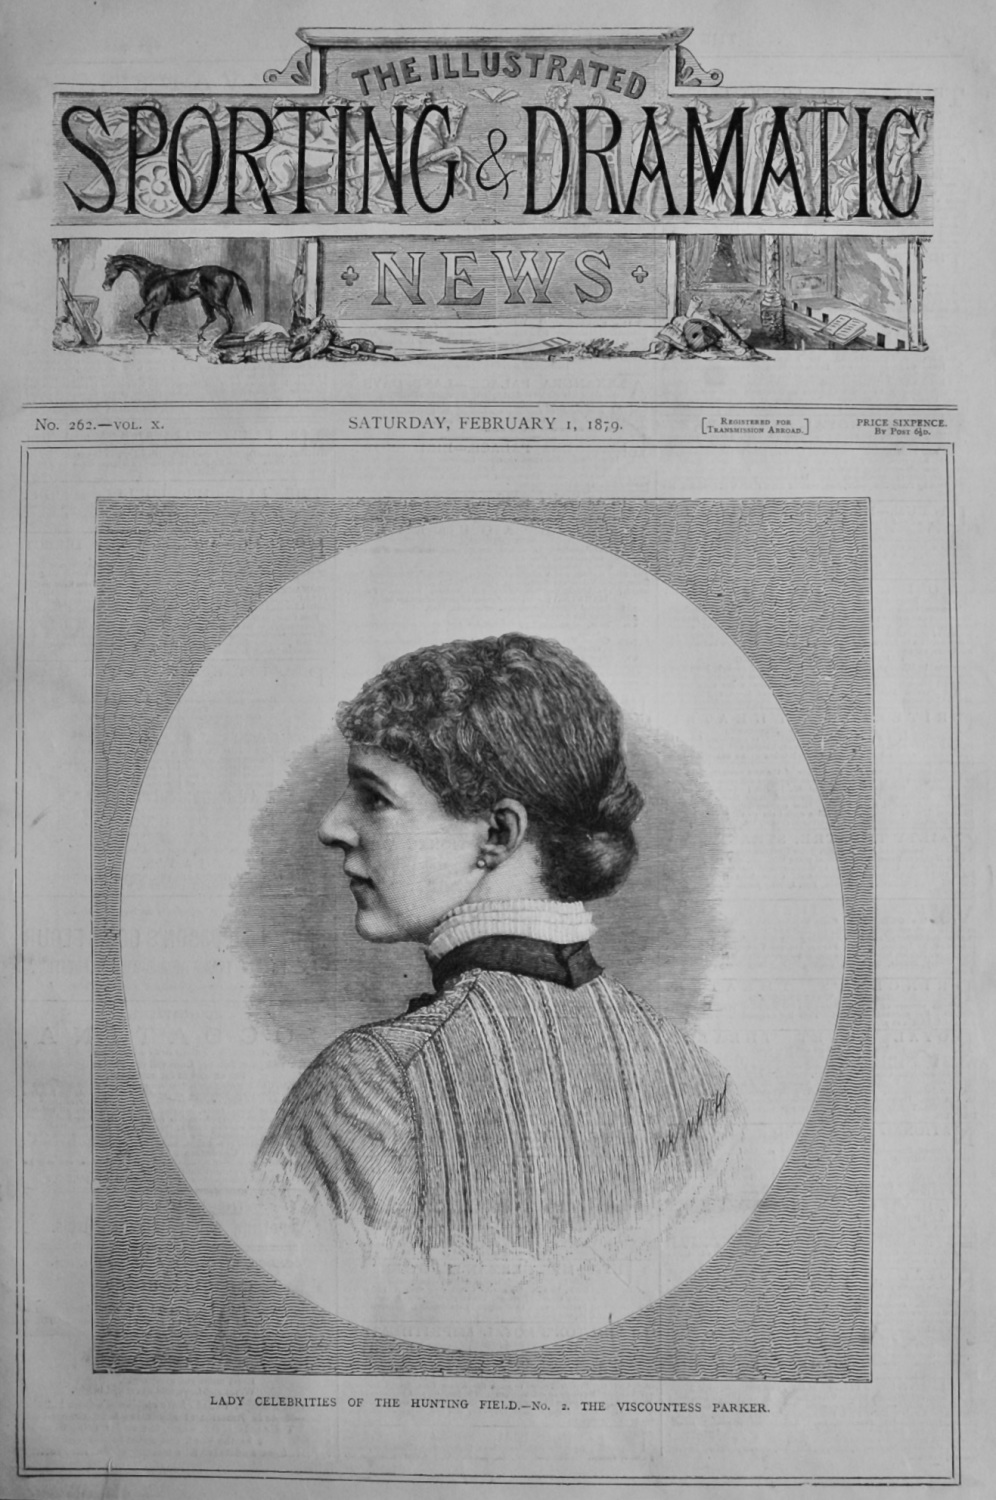 Lady Celebrities of the Hunting Field.-  No. 2. The Viscountess Parker. 187